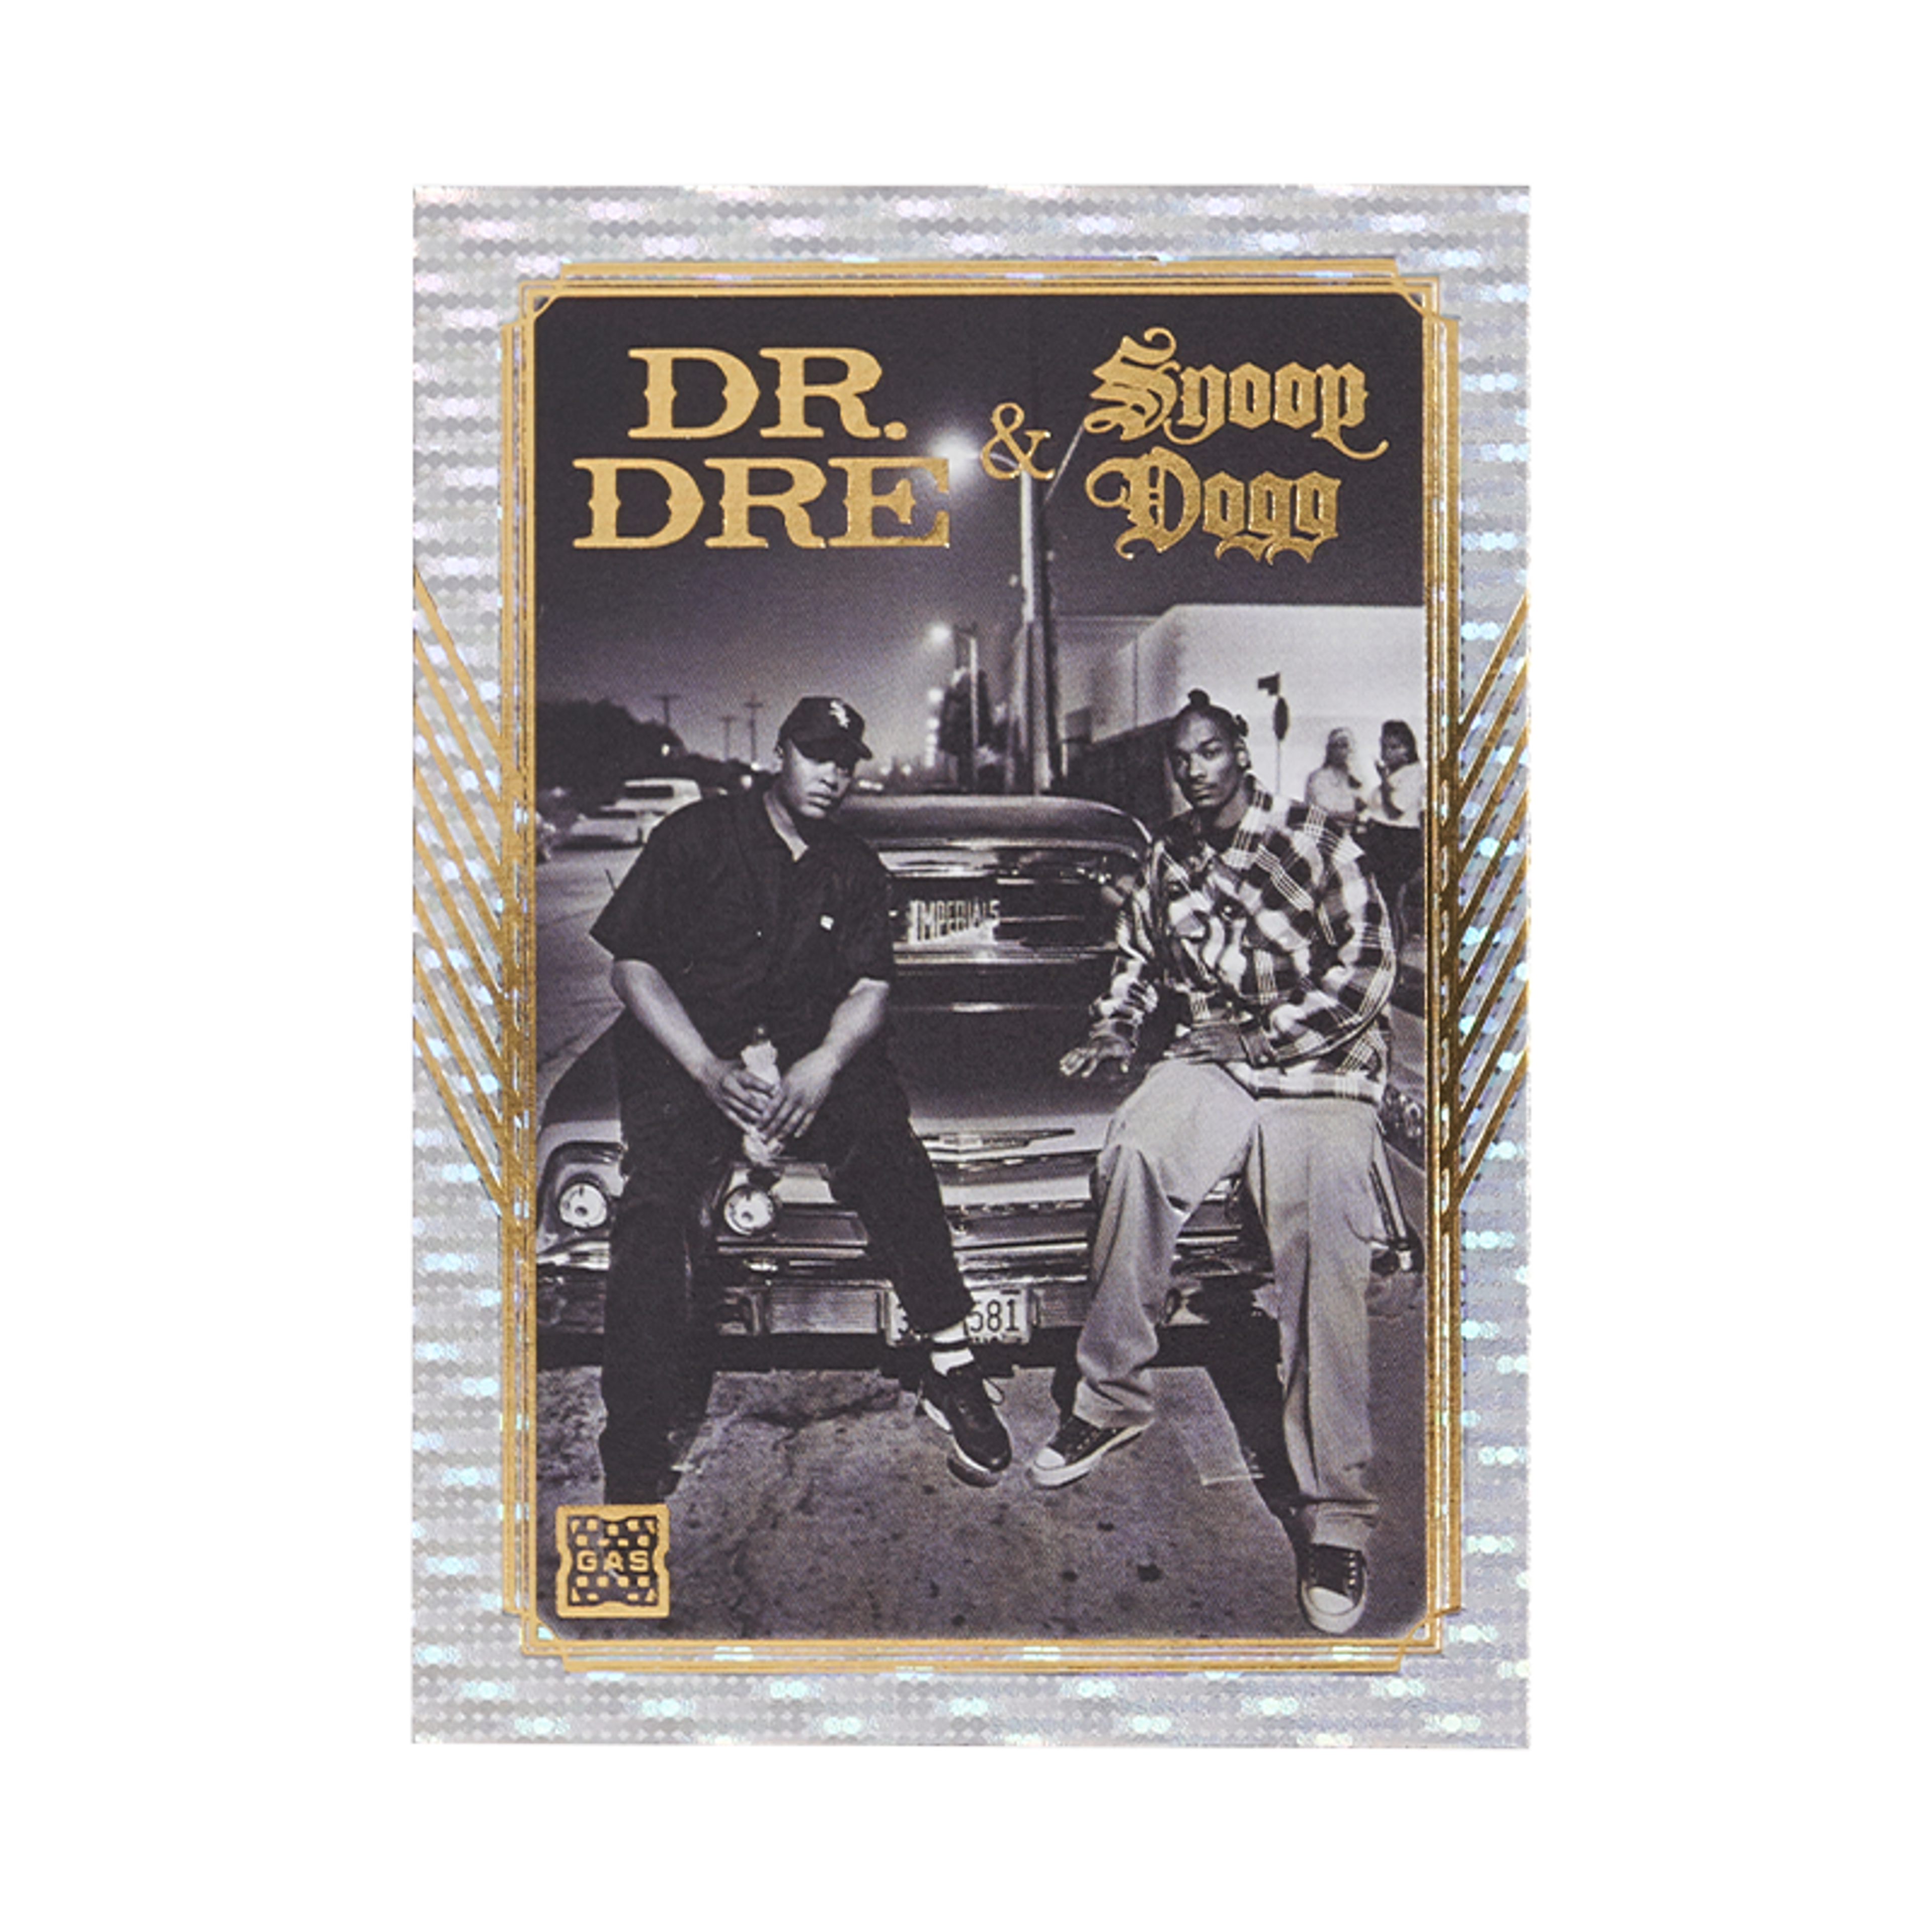 Alternate View 2 of The Official Dr. Dre & Snoop Dogg Deluxe GAS Trading Card Tin Bo